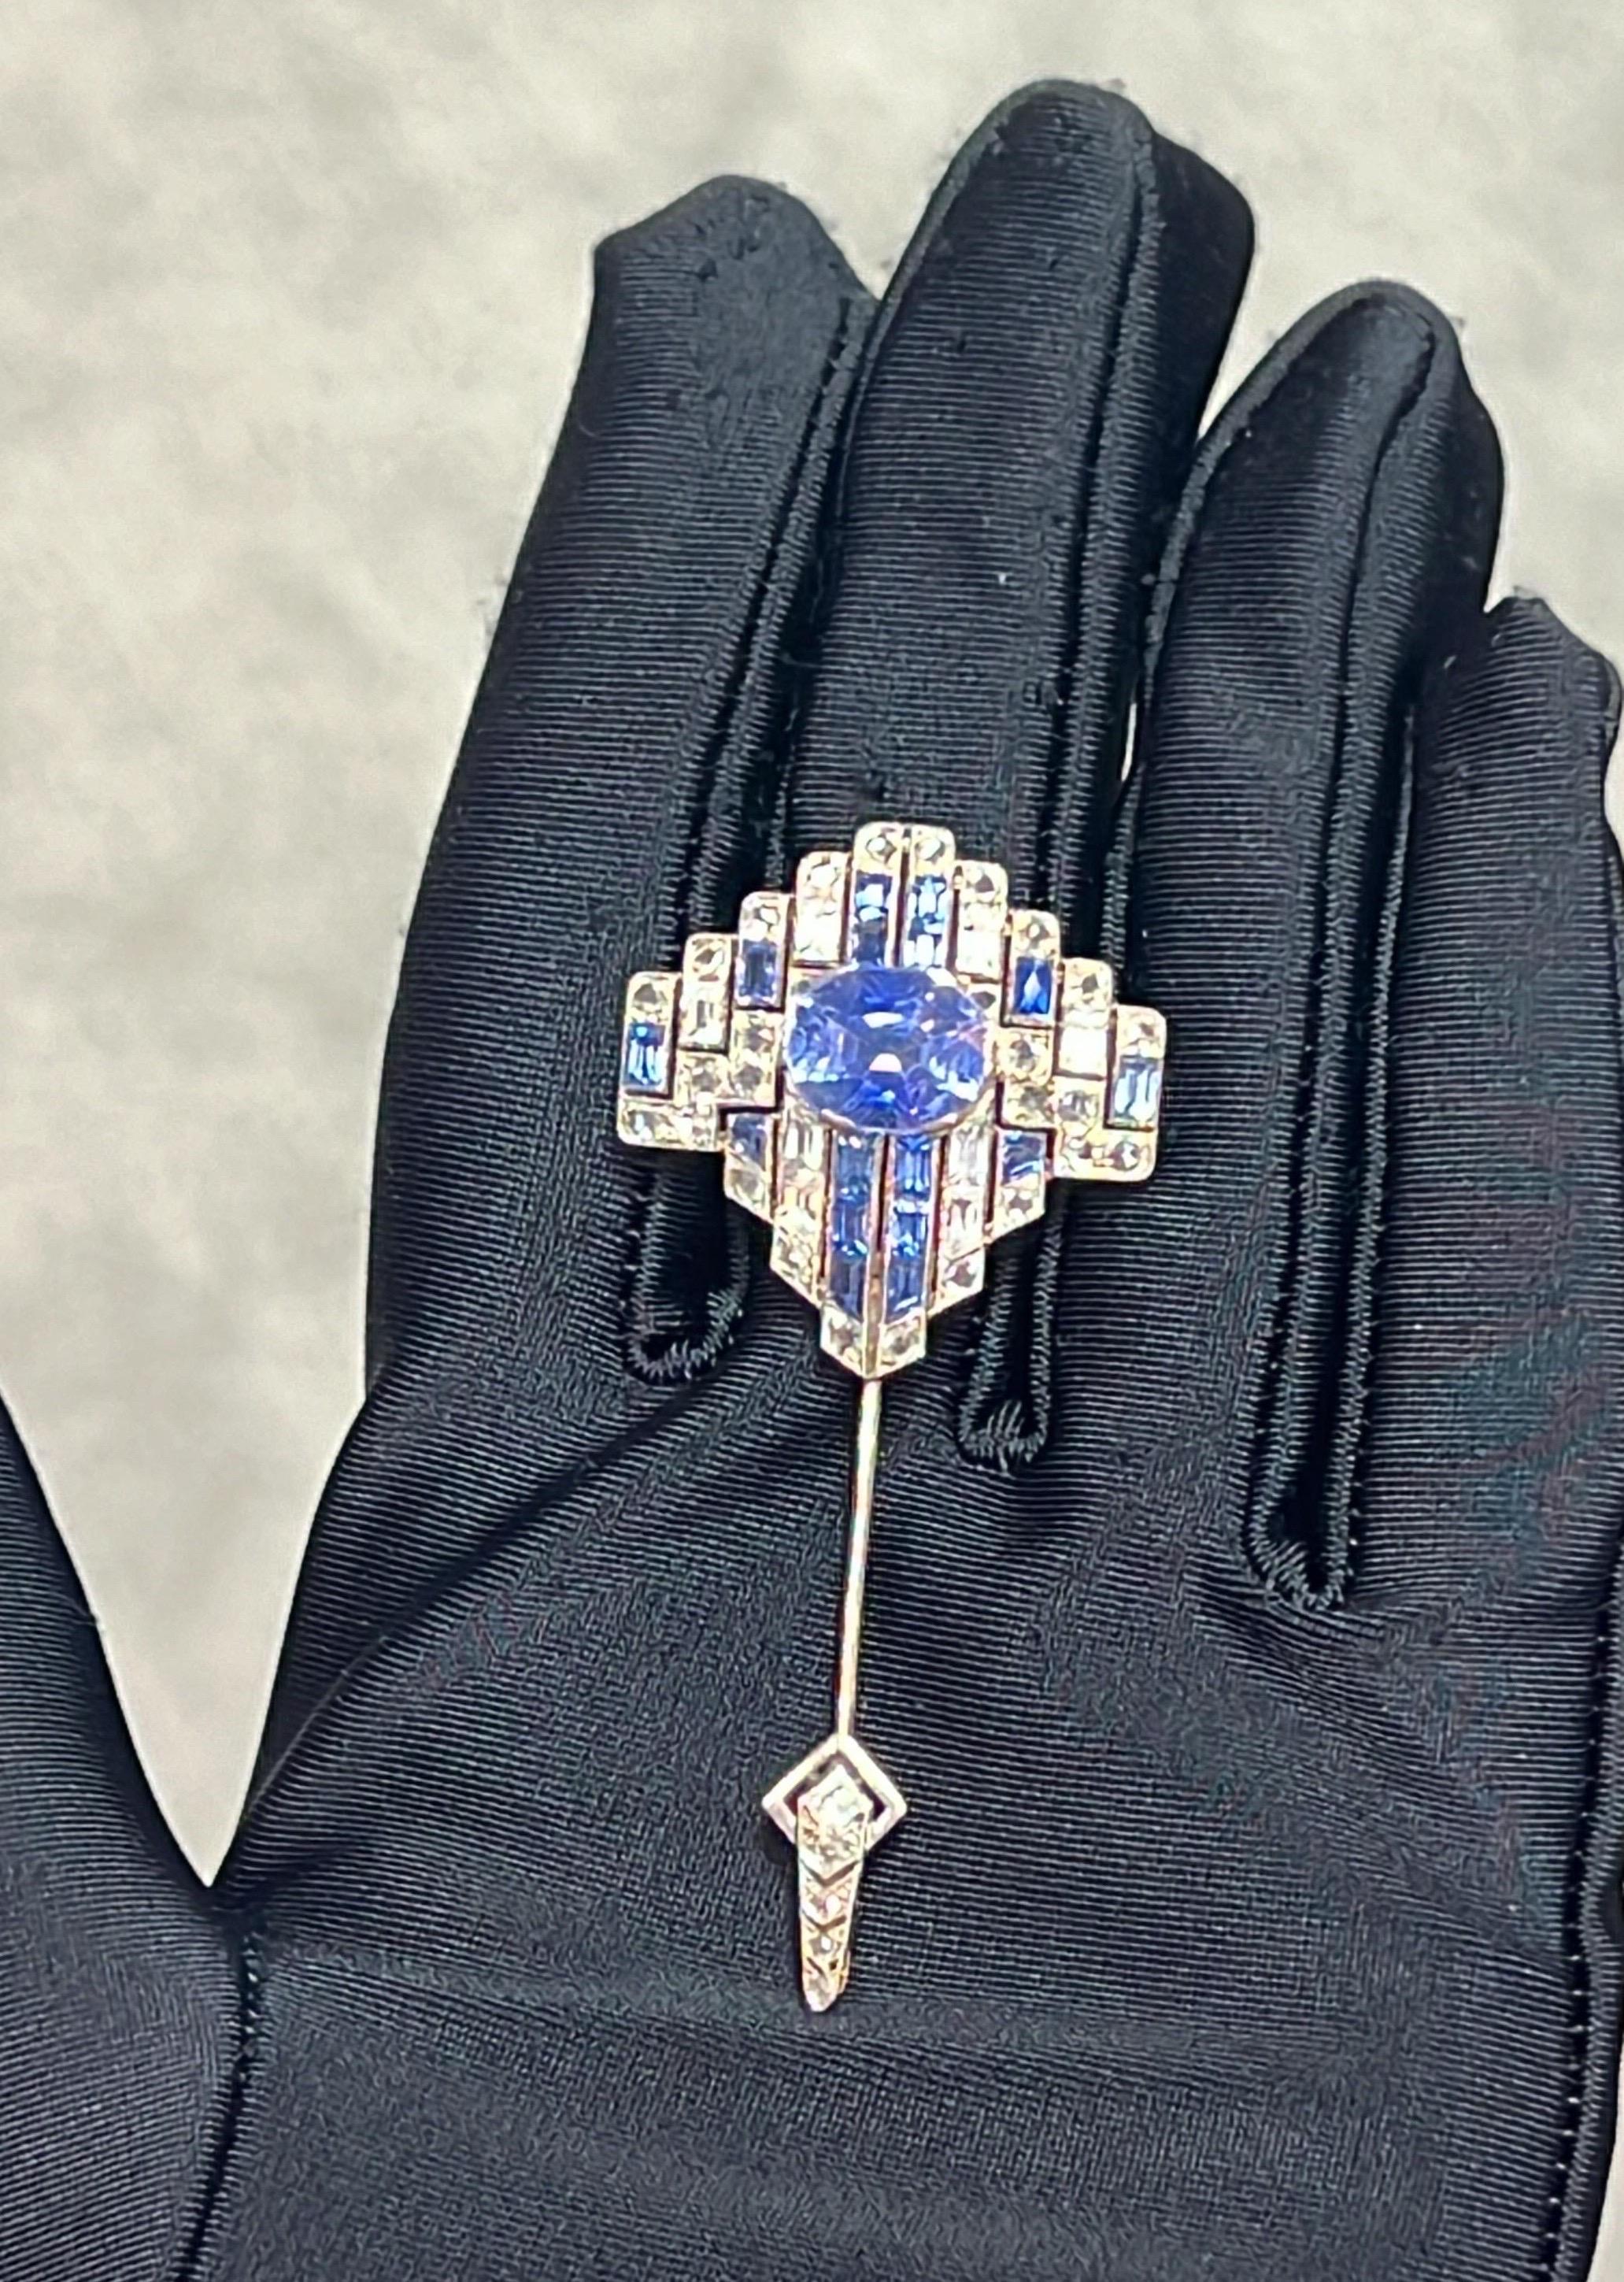 Cartier Art Deco Sapphire Jabot Brooch

A Cartier brooch featuring a center oval-shaped sapphire, accented with rectangle-cut sapphires and baguette and rose-cut diamonds.

Approximate length: 2.5